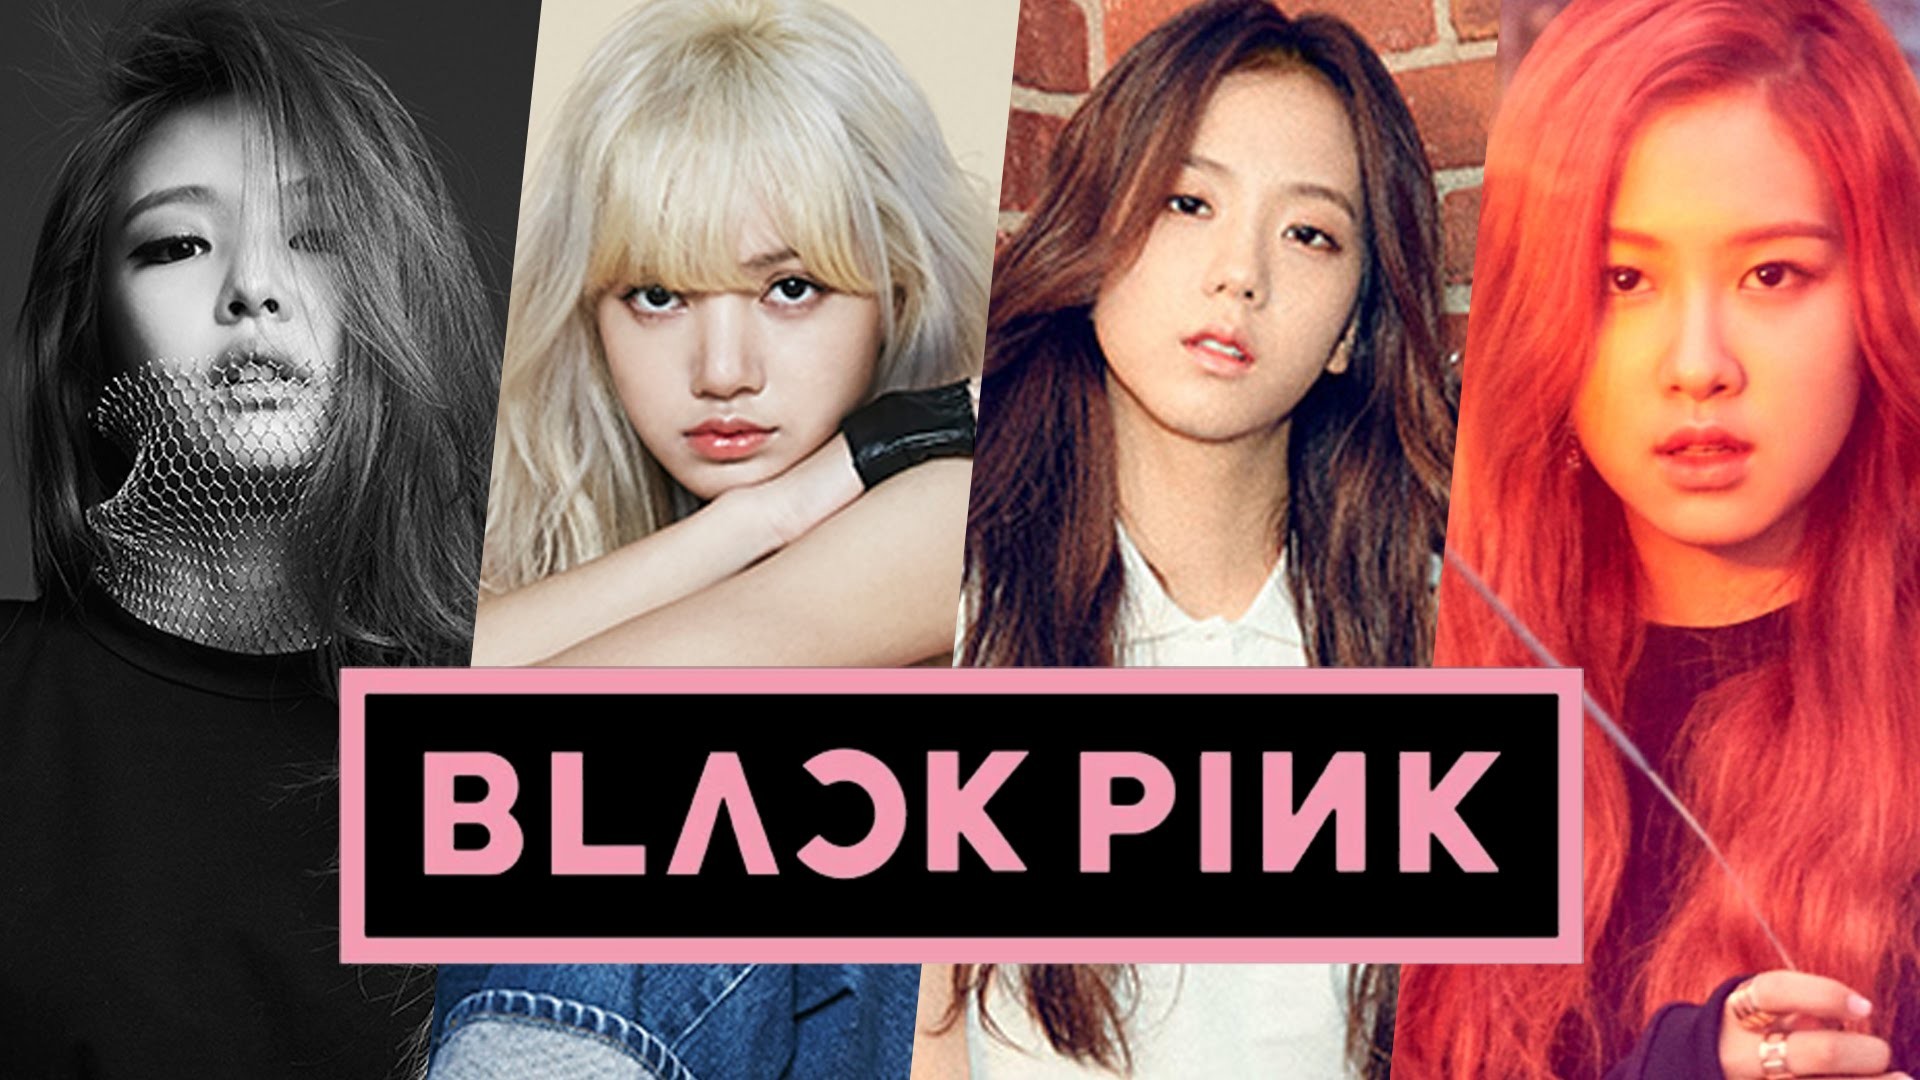 1920x1080 Black Pink images BLACKPINK HD wallpaper and background photos